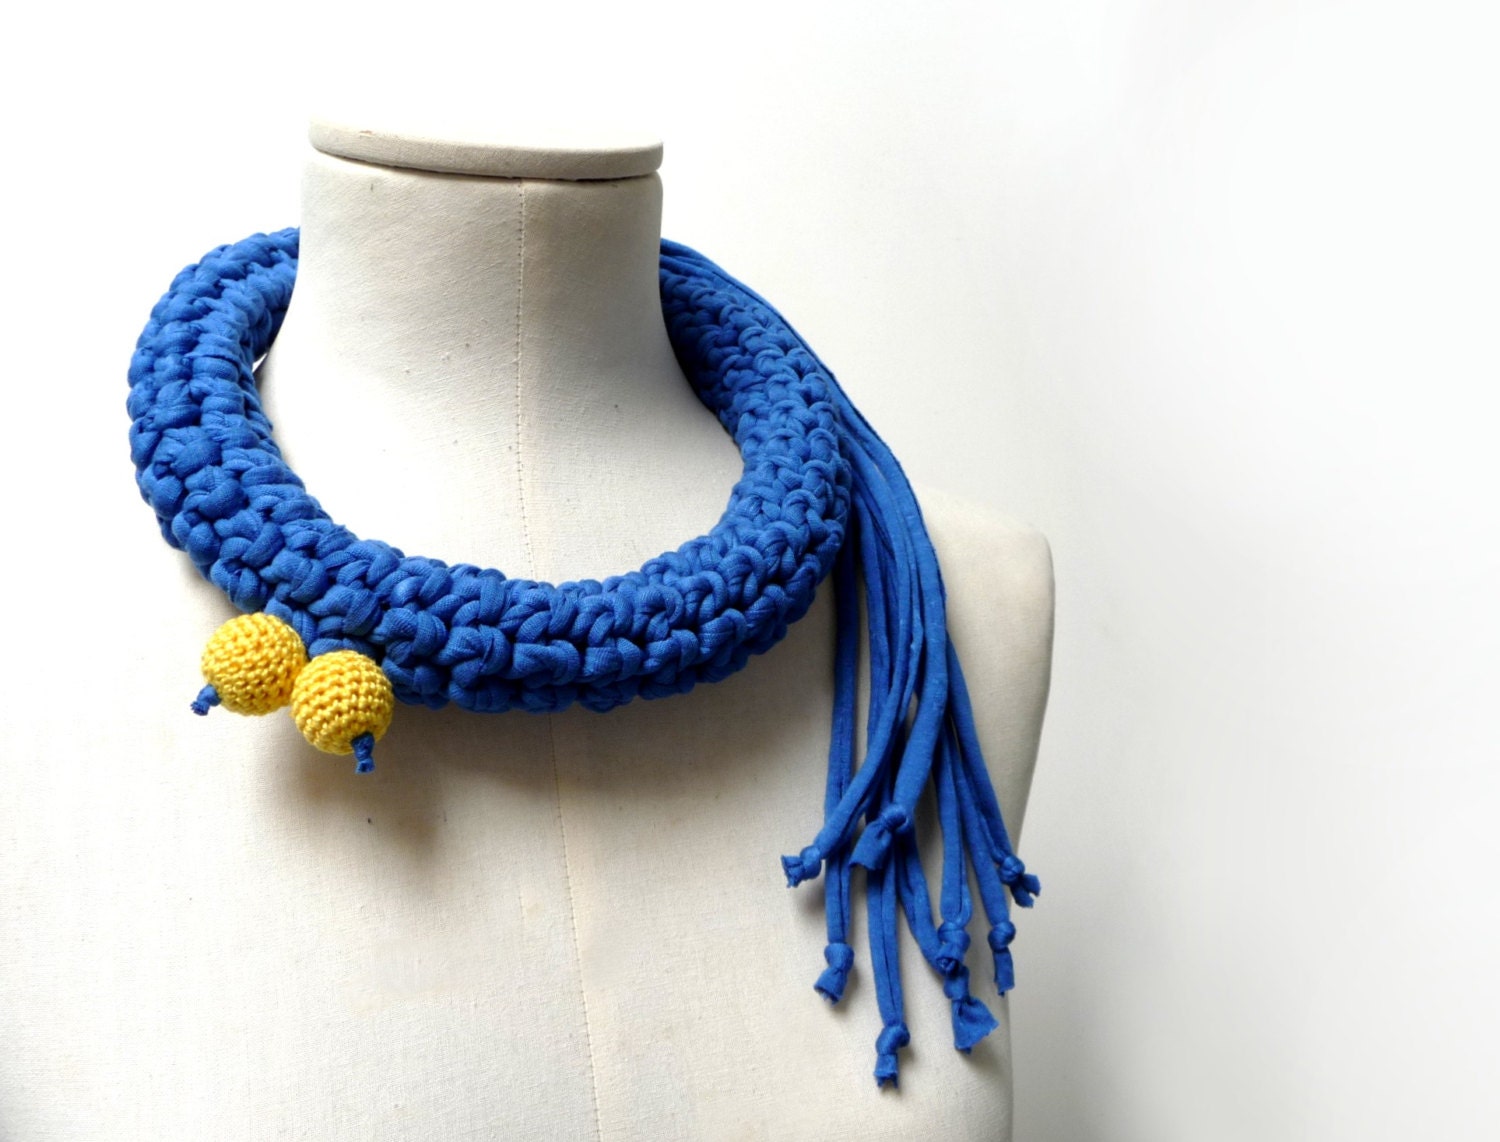 Crochet Statement Necklace - Electric Blue Upcycled Jersey Yarn - Jersey Scarf Cowl - Crochet Jewelry - Textile Necklace - ixela